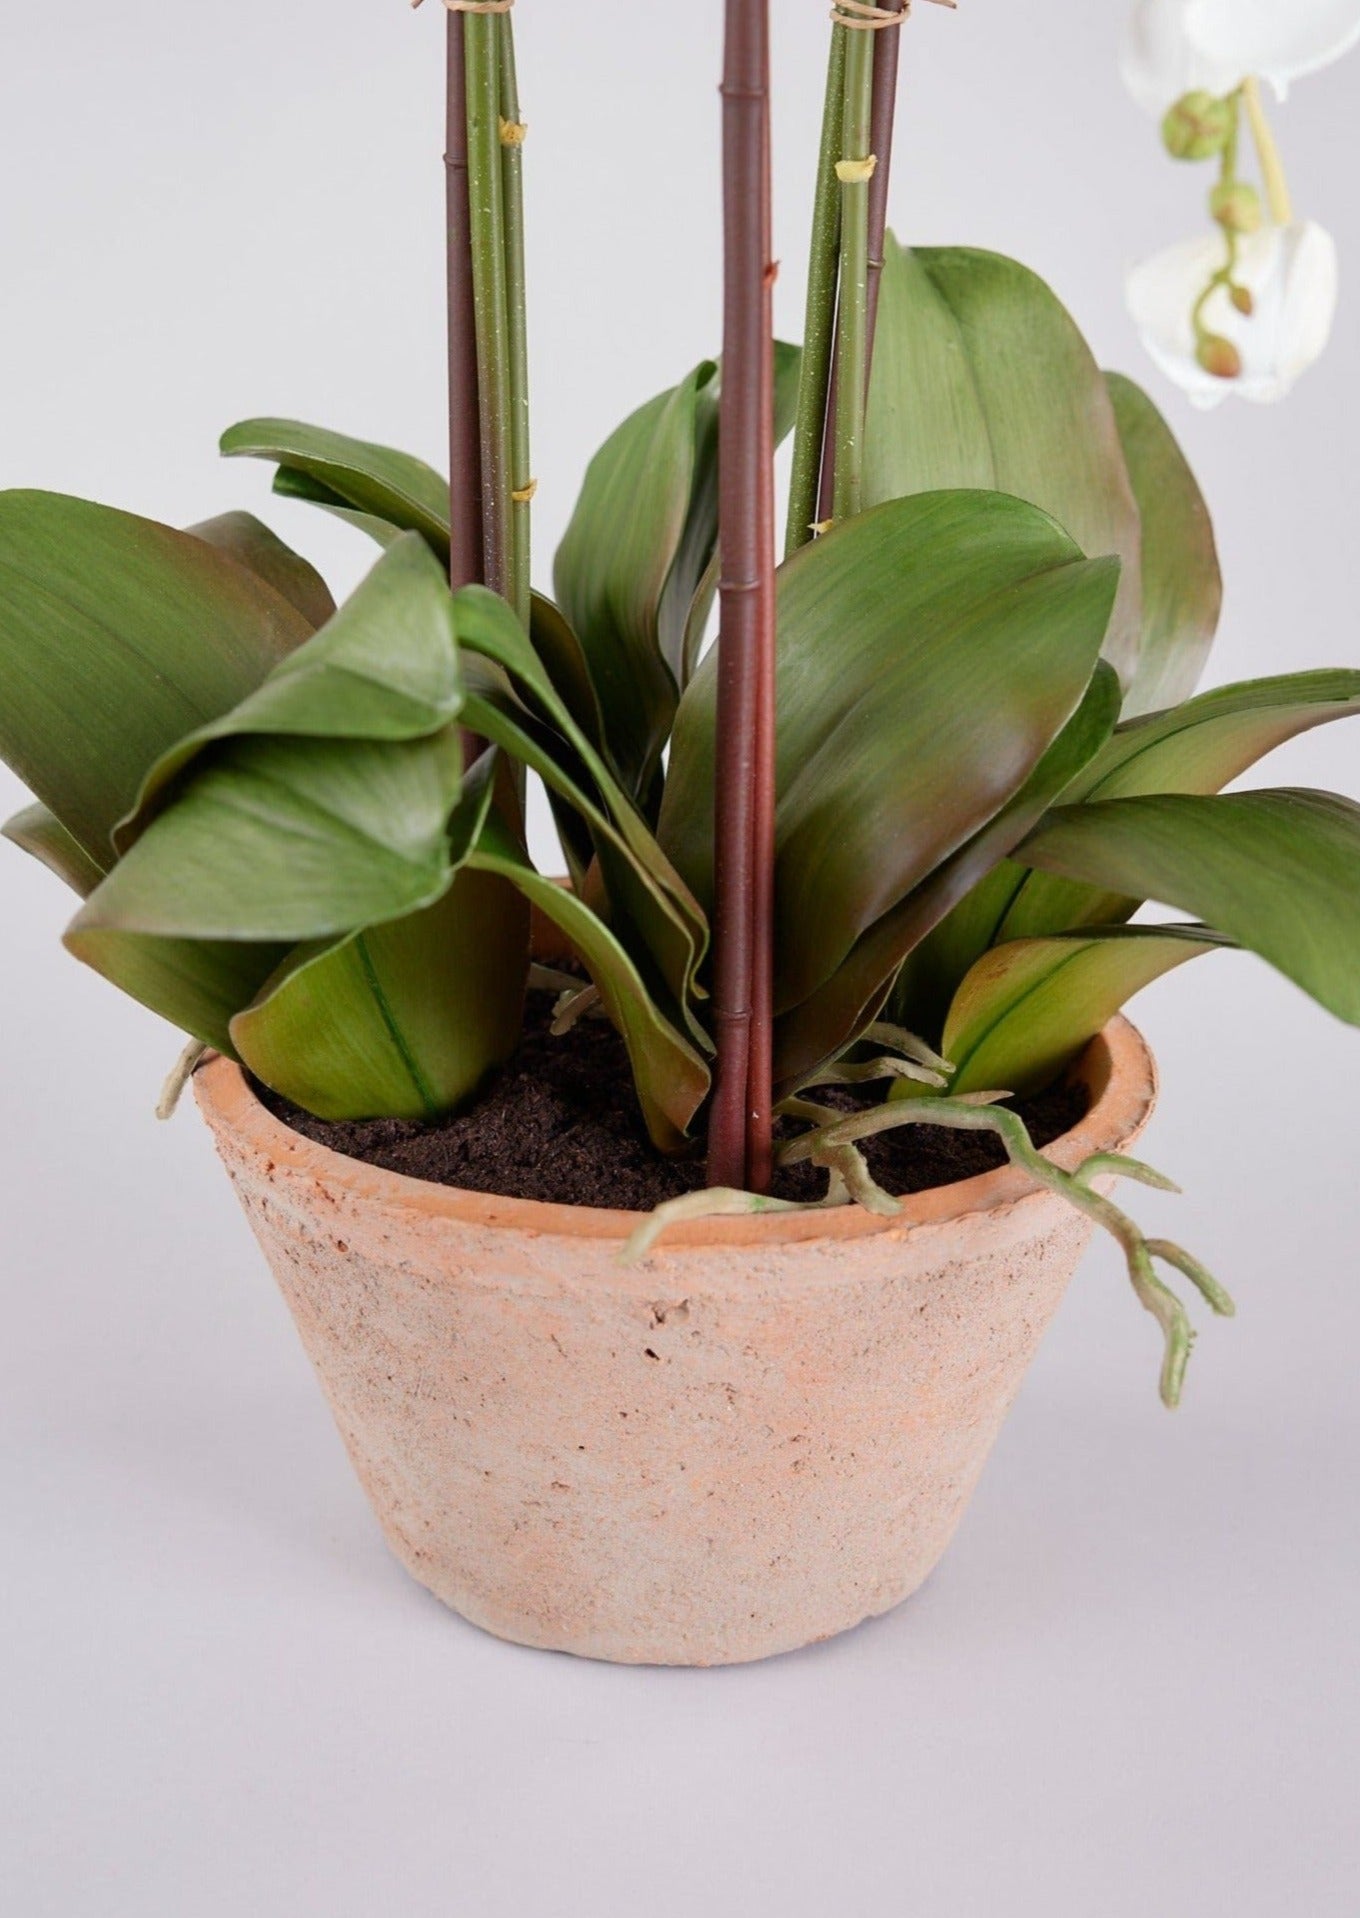 Pot and Soil of Faux Orchid Plant in Closeup View